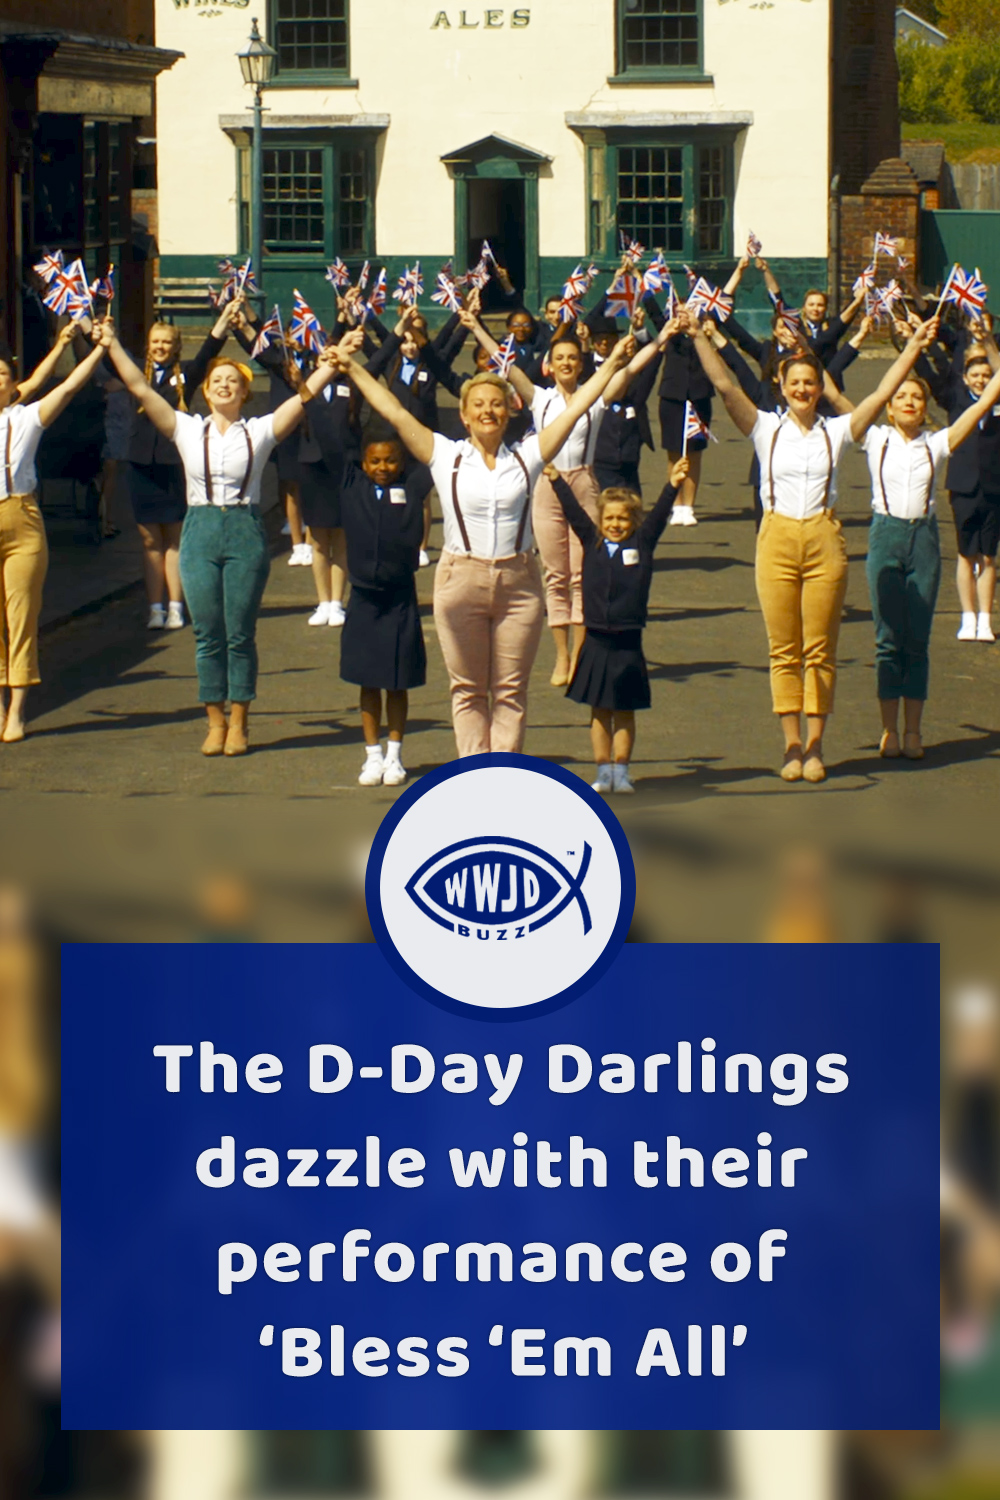 The D-Day Darlings dazzle with their performance of ‘Bless ‘Em All’